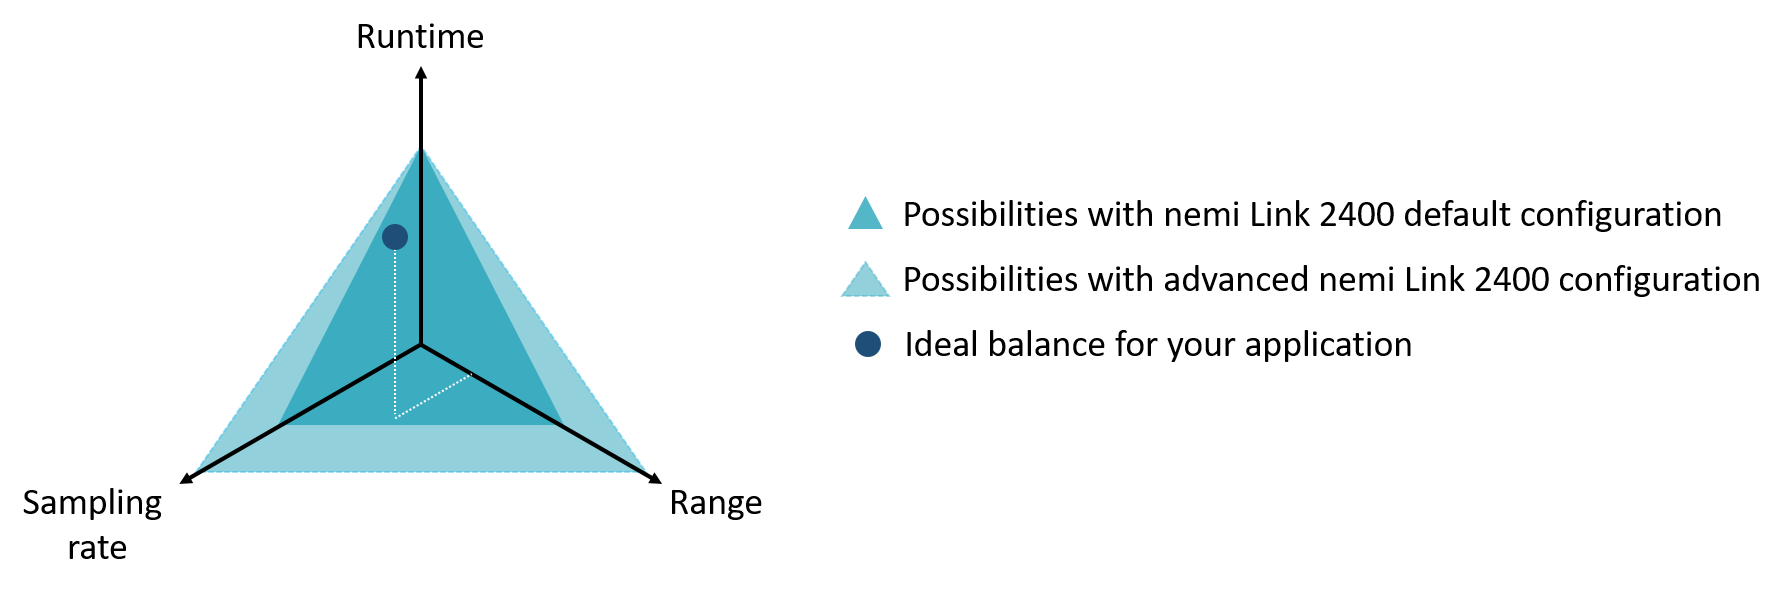 Representation of the Magic Triangle to Illustrate the Perfect Balance of Runtime, Sampling Rate, and Range